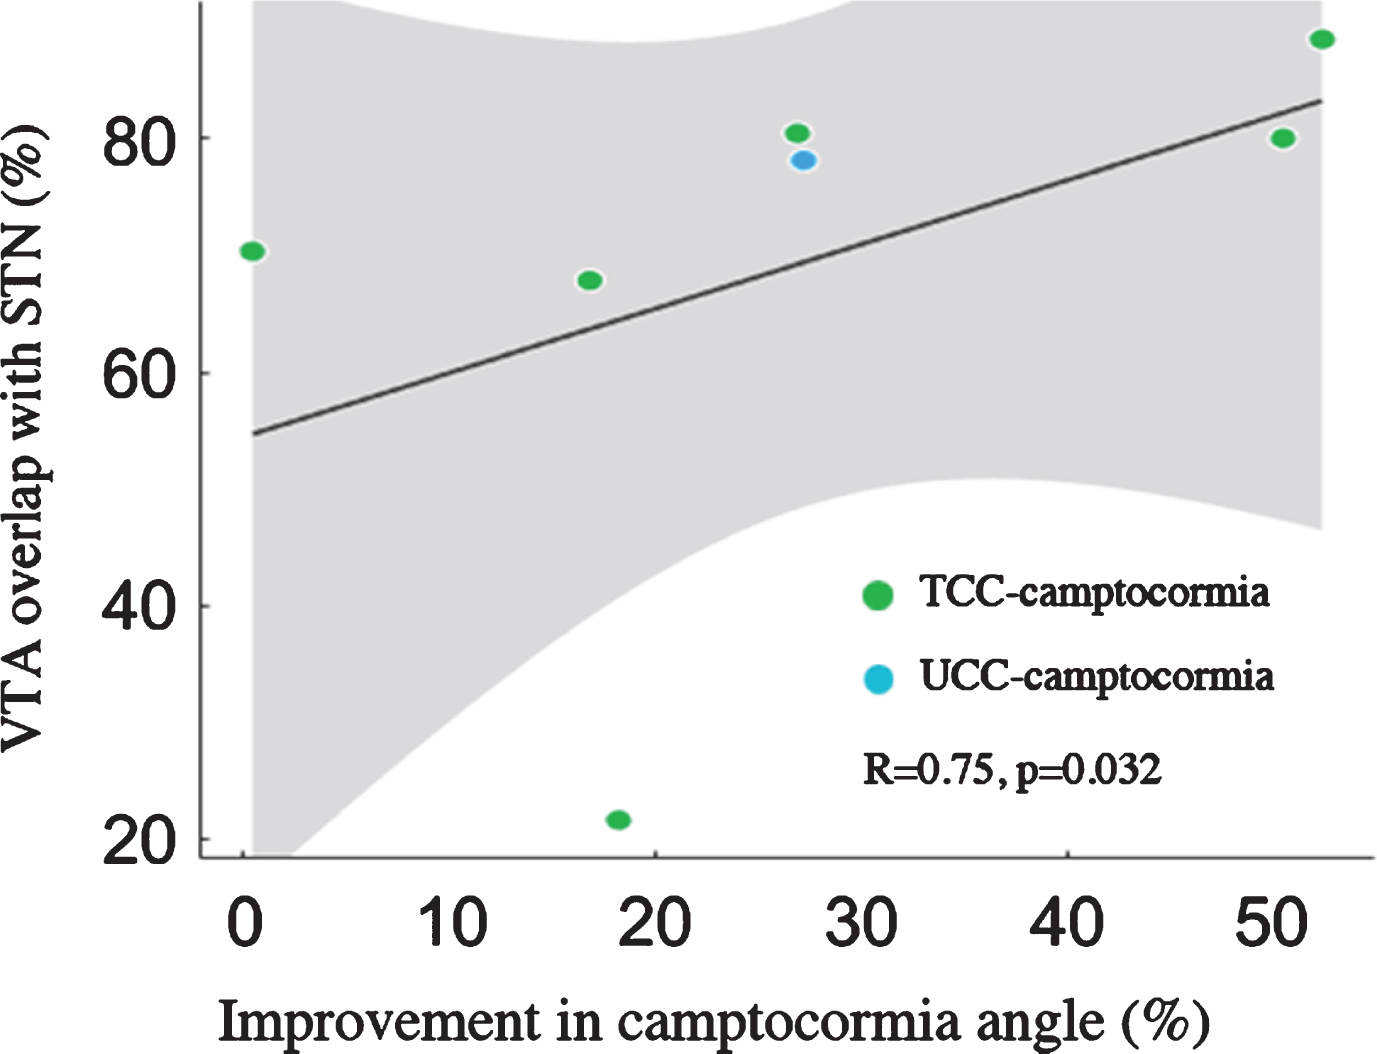 Percentage of volume of tissue activated (VTA) overlap with subthalamic nucleus (STN) correlated with percent improvements in camptocormia angles [total camptocormia (TCC) angles in 6 patients and upper camptocormia (UCC) angle in 1 patient] in patients with camptocormia. Grey areas represent the 95% confidence intervals (CIs).